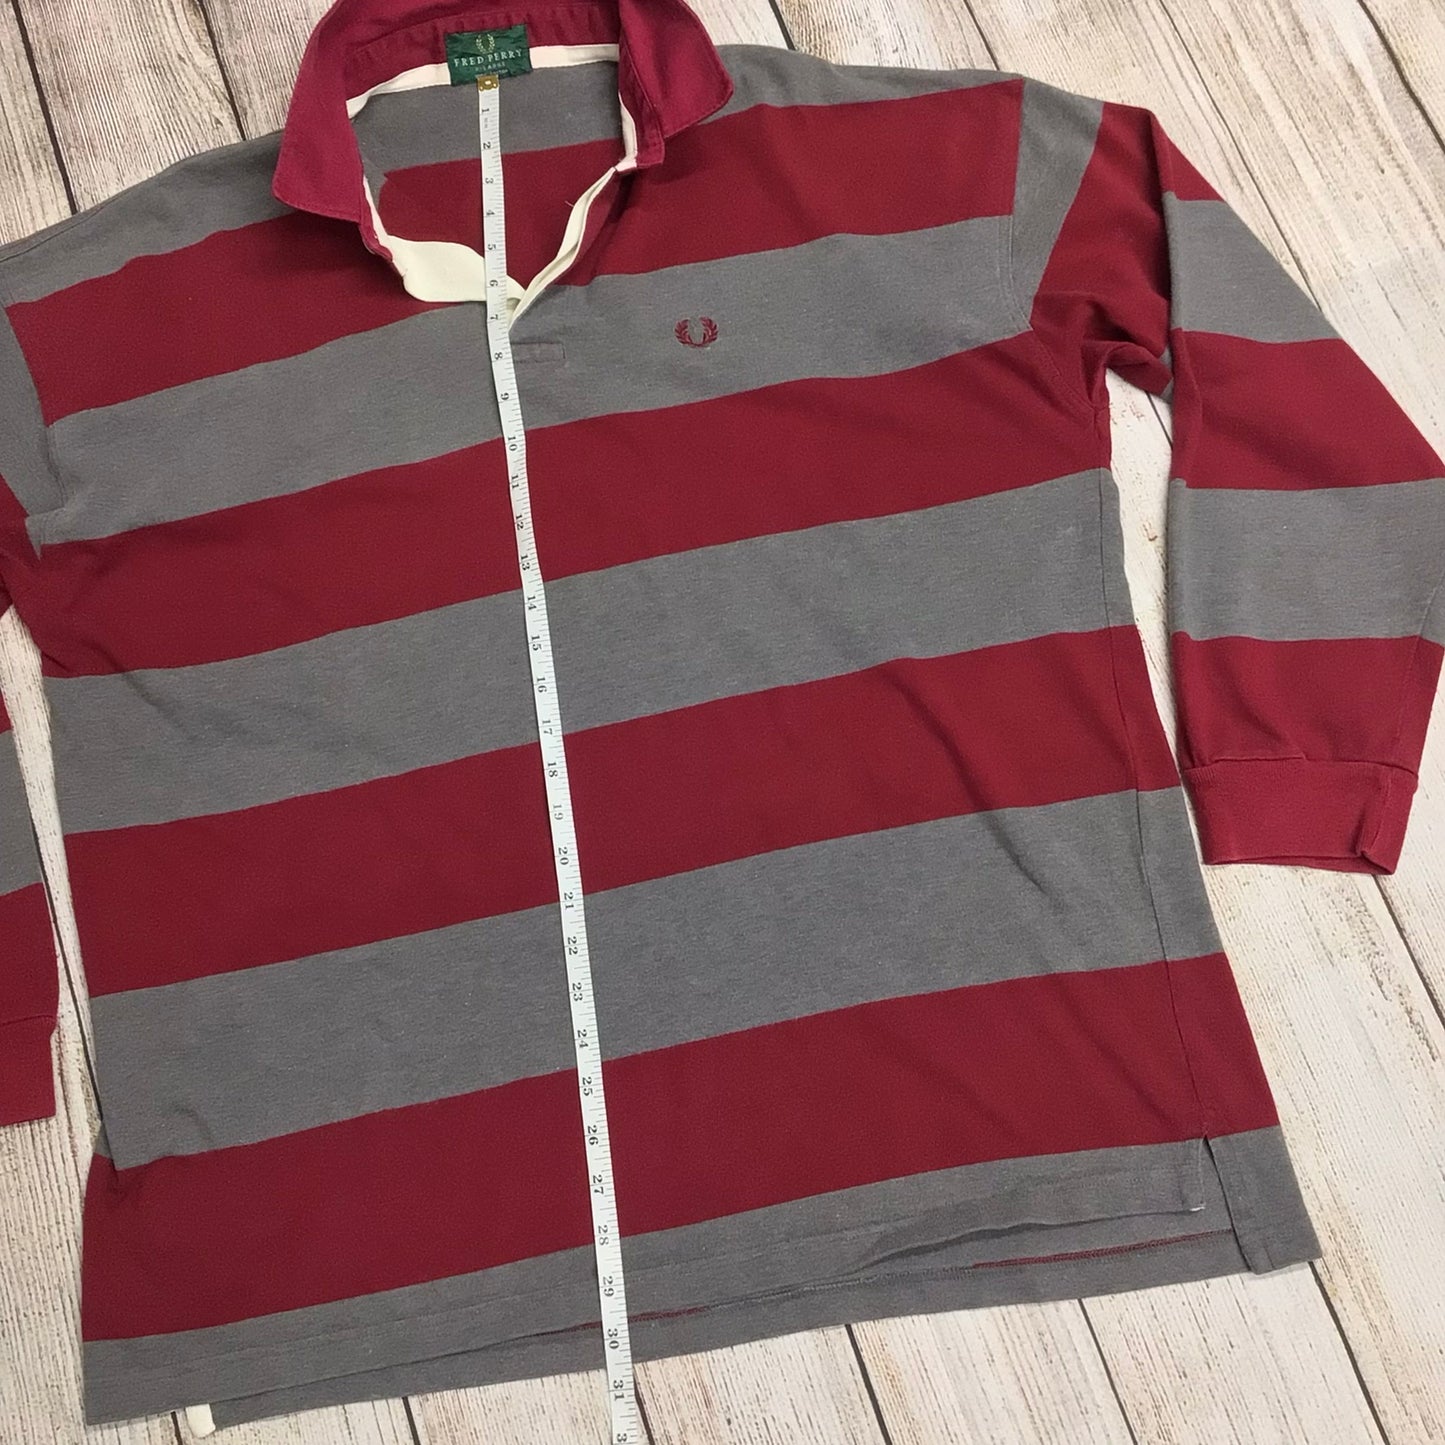 Fred Perry Red & Grey Striped Long Sleeve Polo Shirt 100% Cotton Size XL